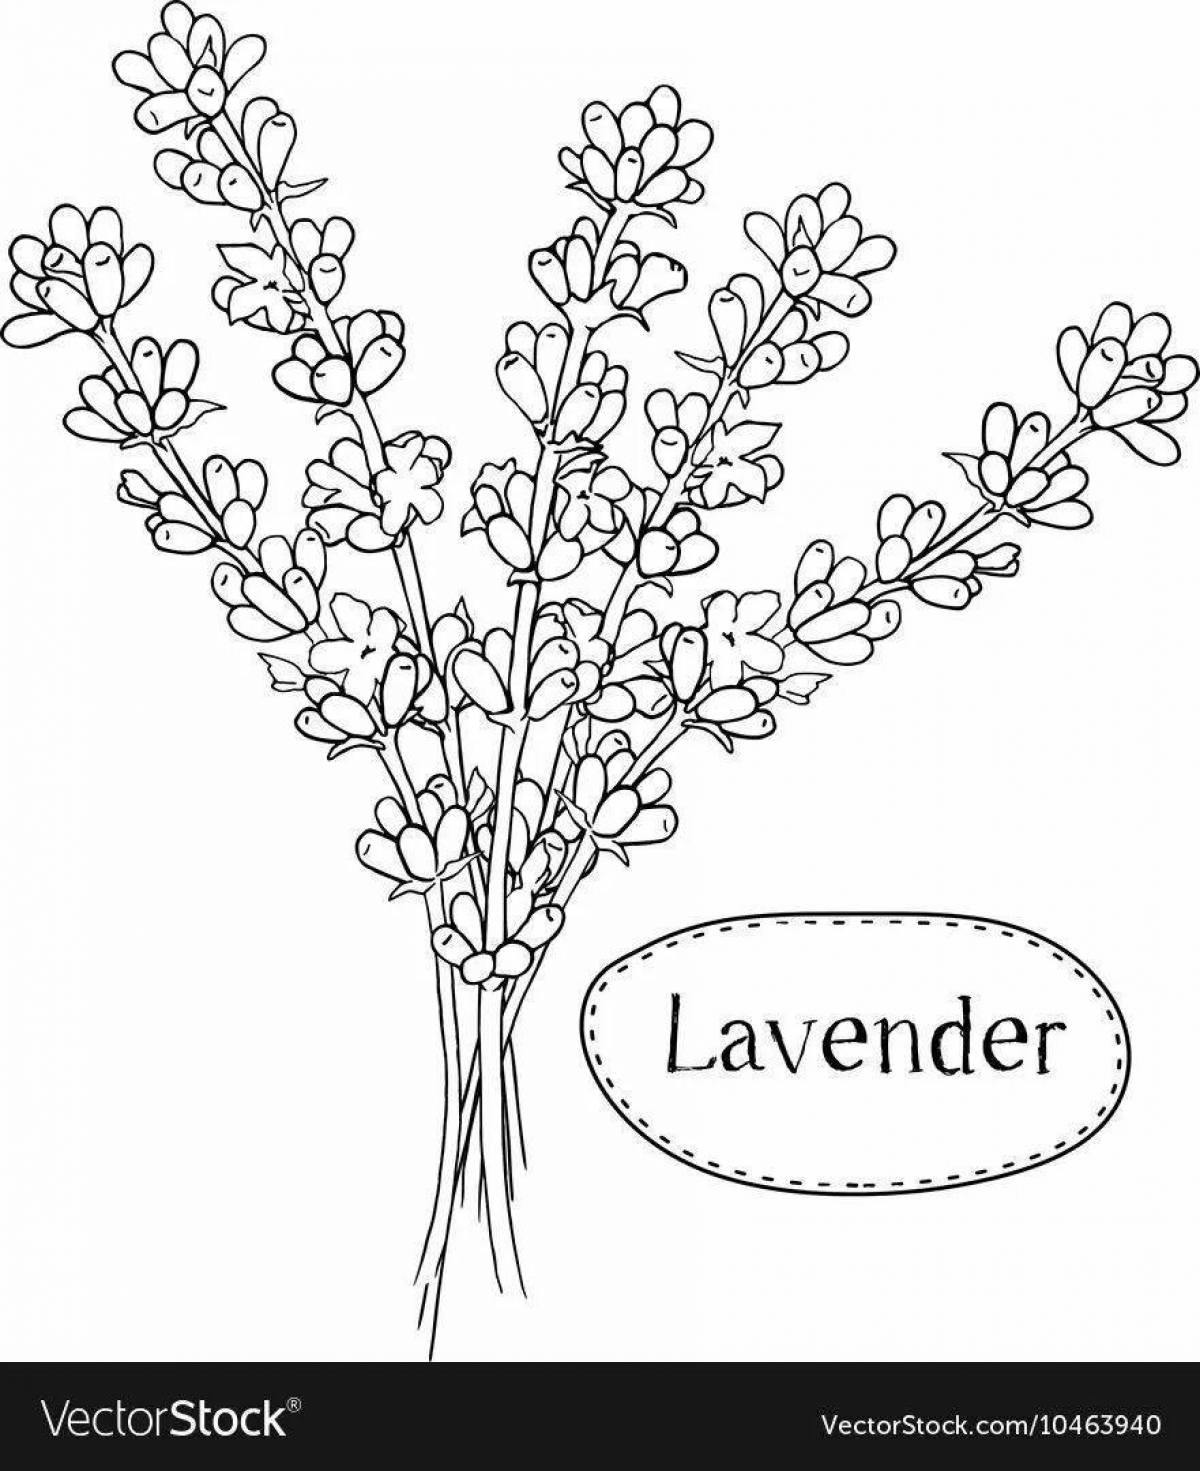 Relaxing lavender coloring page